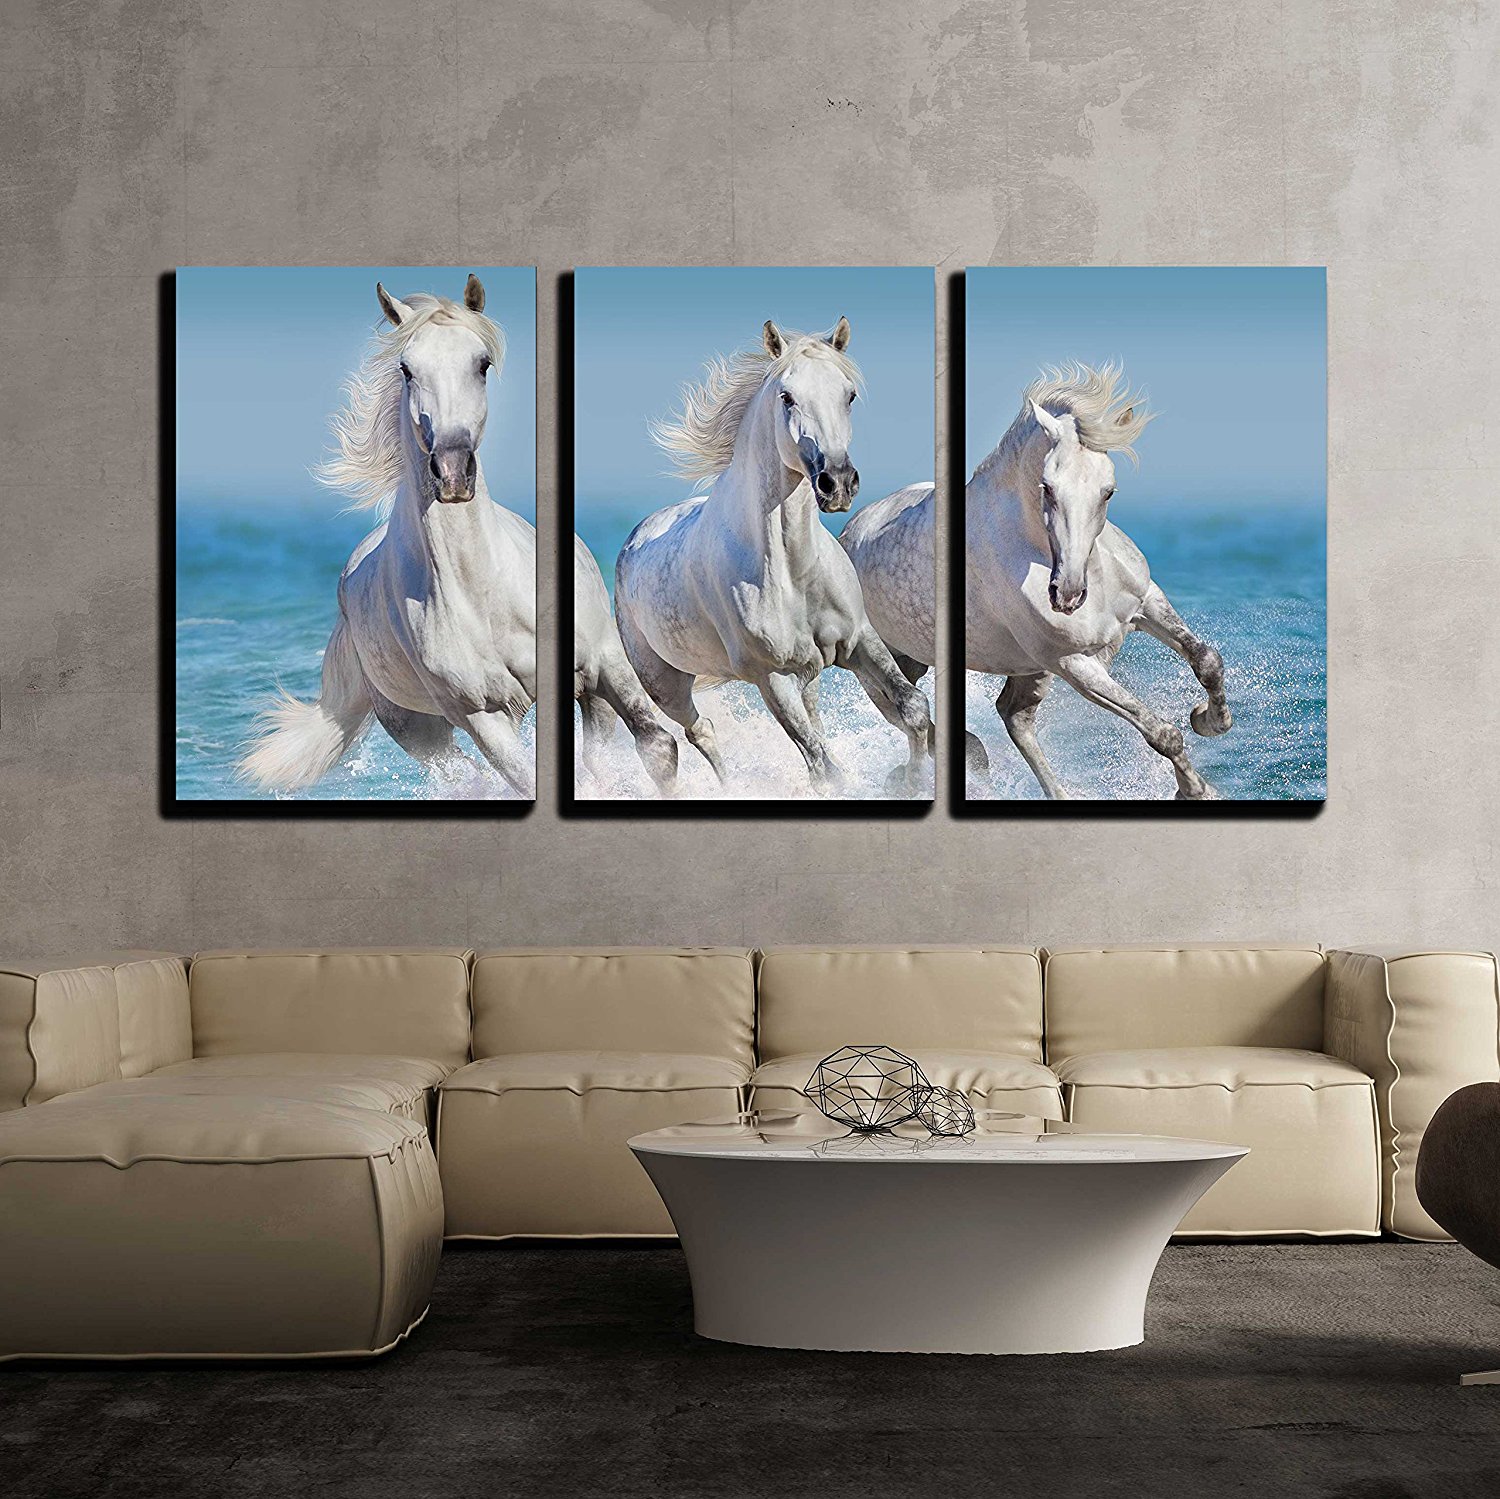  Horse Herd Run Gallop in Waves in the Ocean Canvas Wall Art Drop Shipping